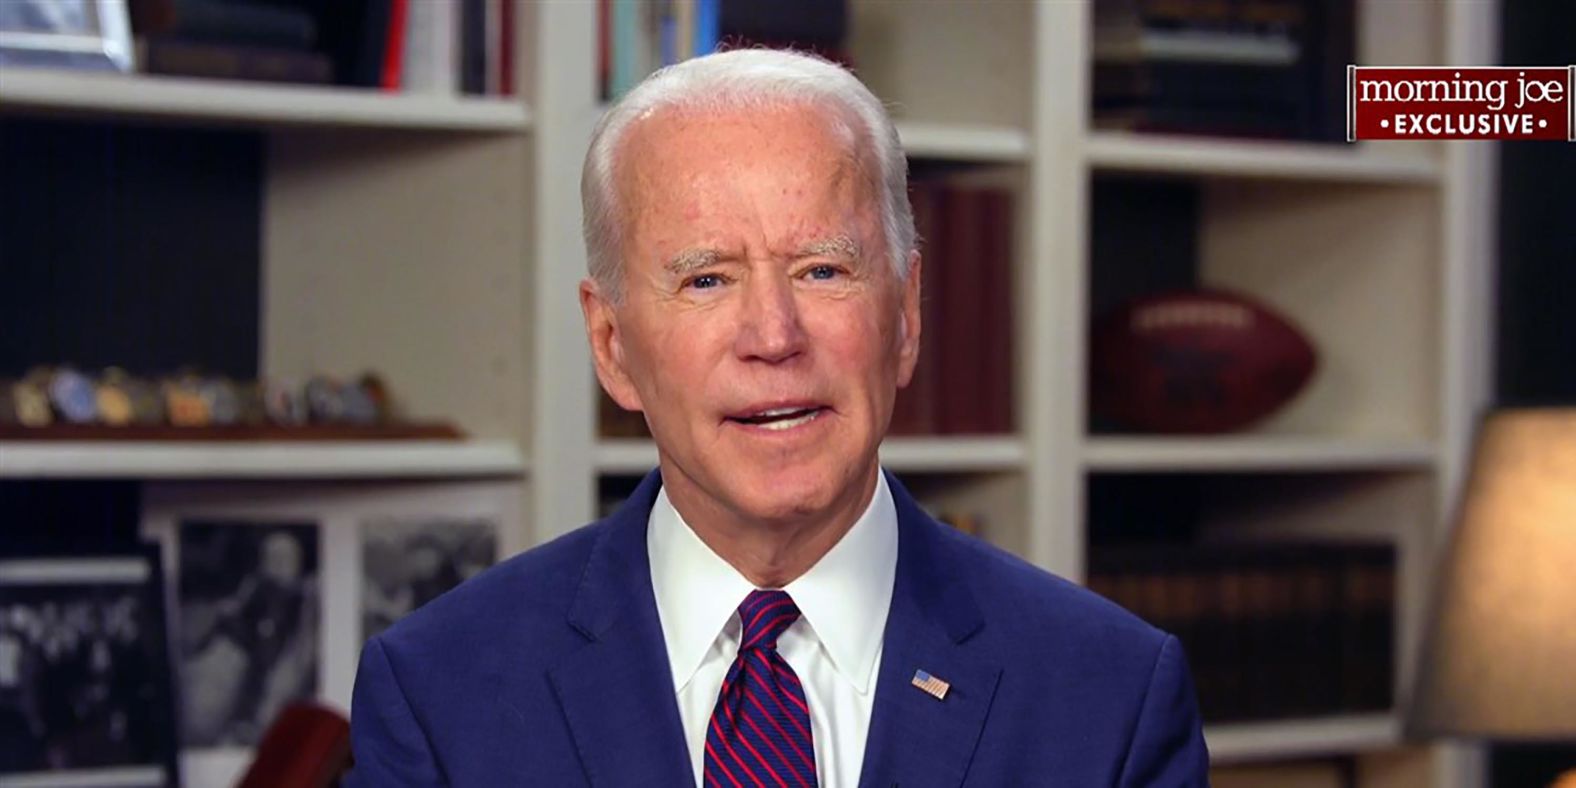 In May 2020, Biden <a href="index.php?page=&url=https%3A%2F%2Fwww.cnn.com%2F2020%2F05%2F01%2Fpolitics%2Fjoe-biden-tara-reade-allegation%2Findex.html" target="_blank">denied a former aide's claims</a> that he sexually assaulted her 27 years ago. "This never happened," Biden said of Tara Reade's allegation. In an interview with MSNBC, Biden said he did not know why Reade was now making the allegation.